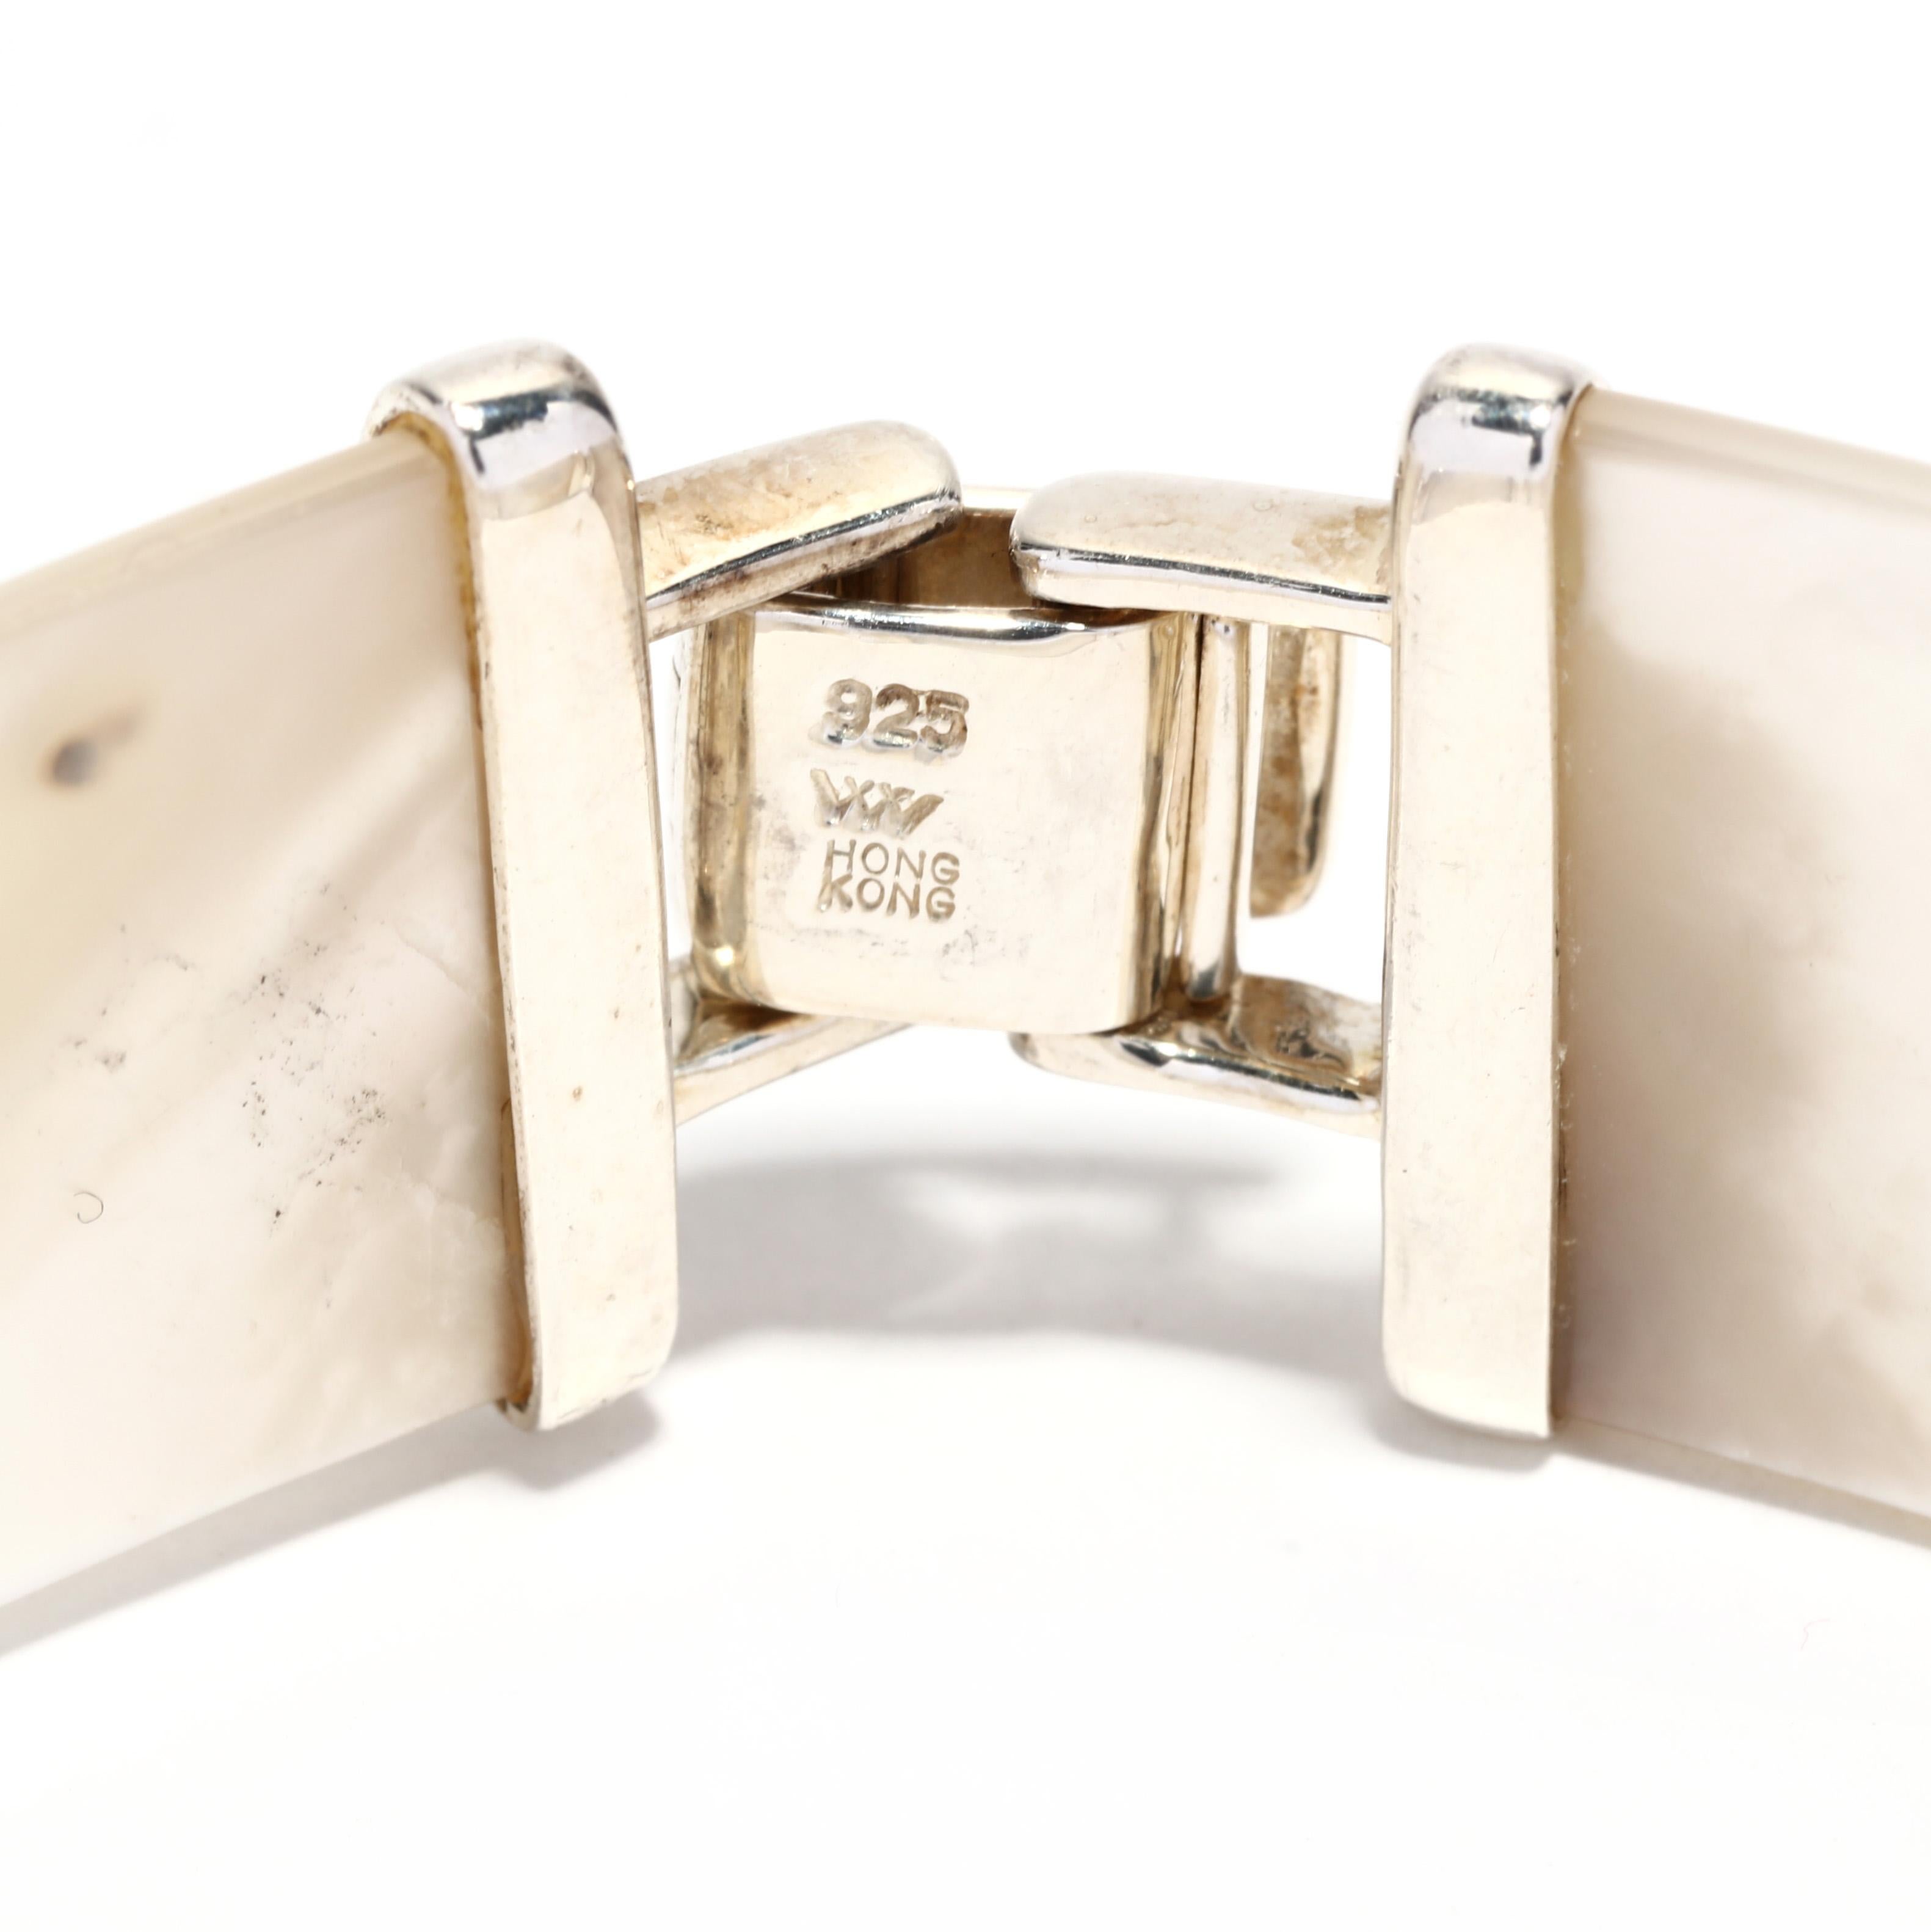 This beautiful vintage mother-of-pearl bracelet is the perfect accessory to any outfit. Crafted with sterling silver, it features classic shell link design with a length of 8 inches. Its simple style and elegant design make it an ideal piece for any